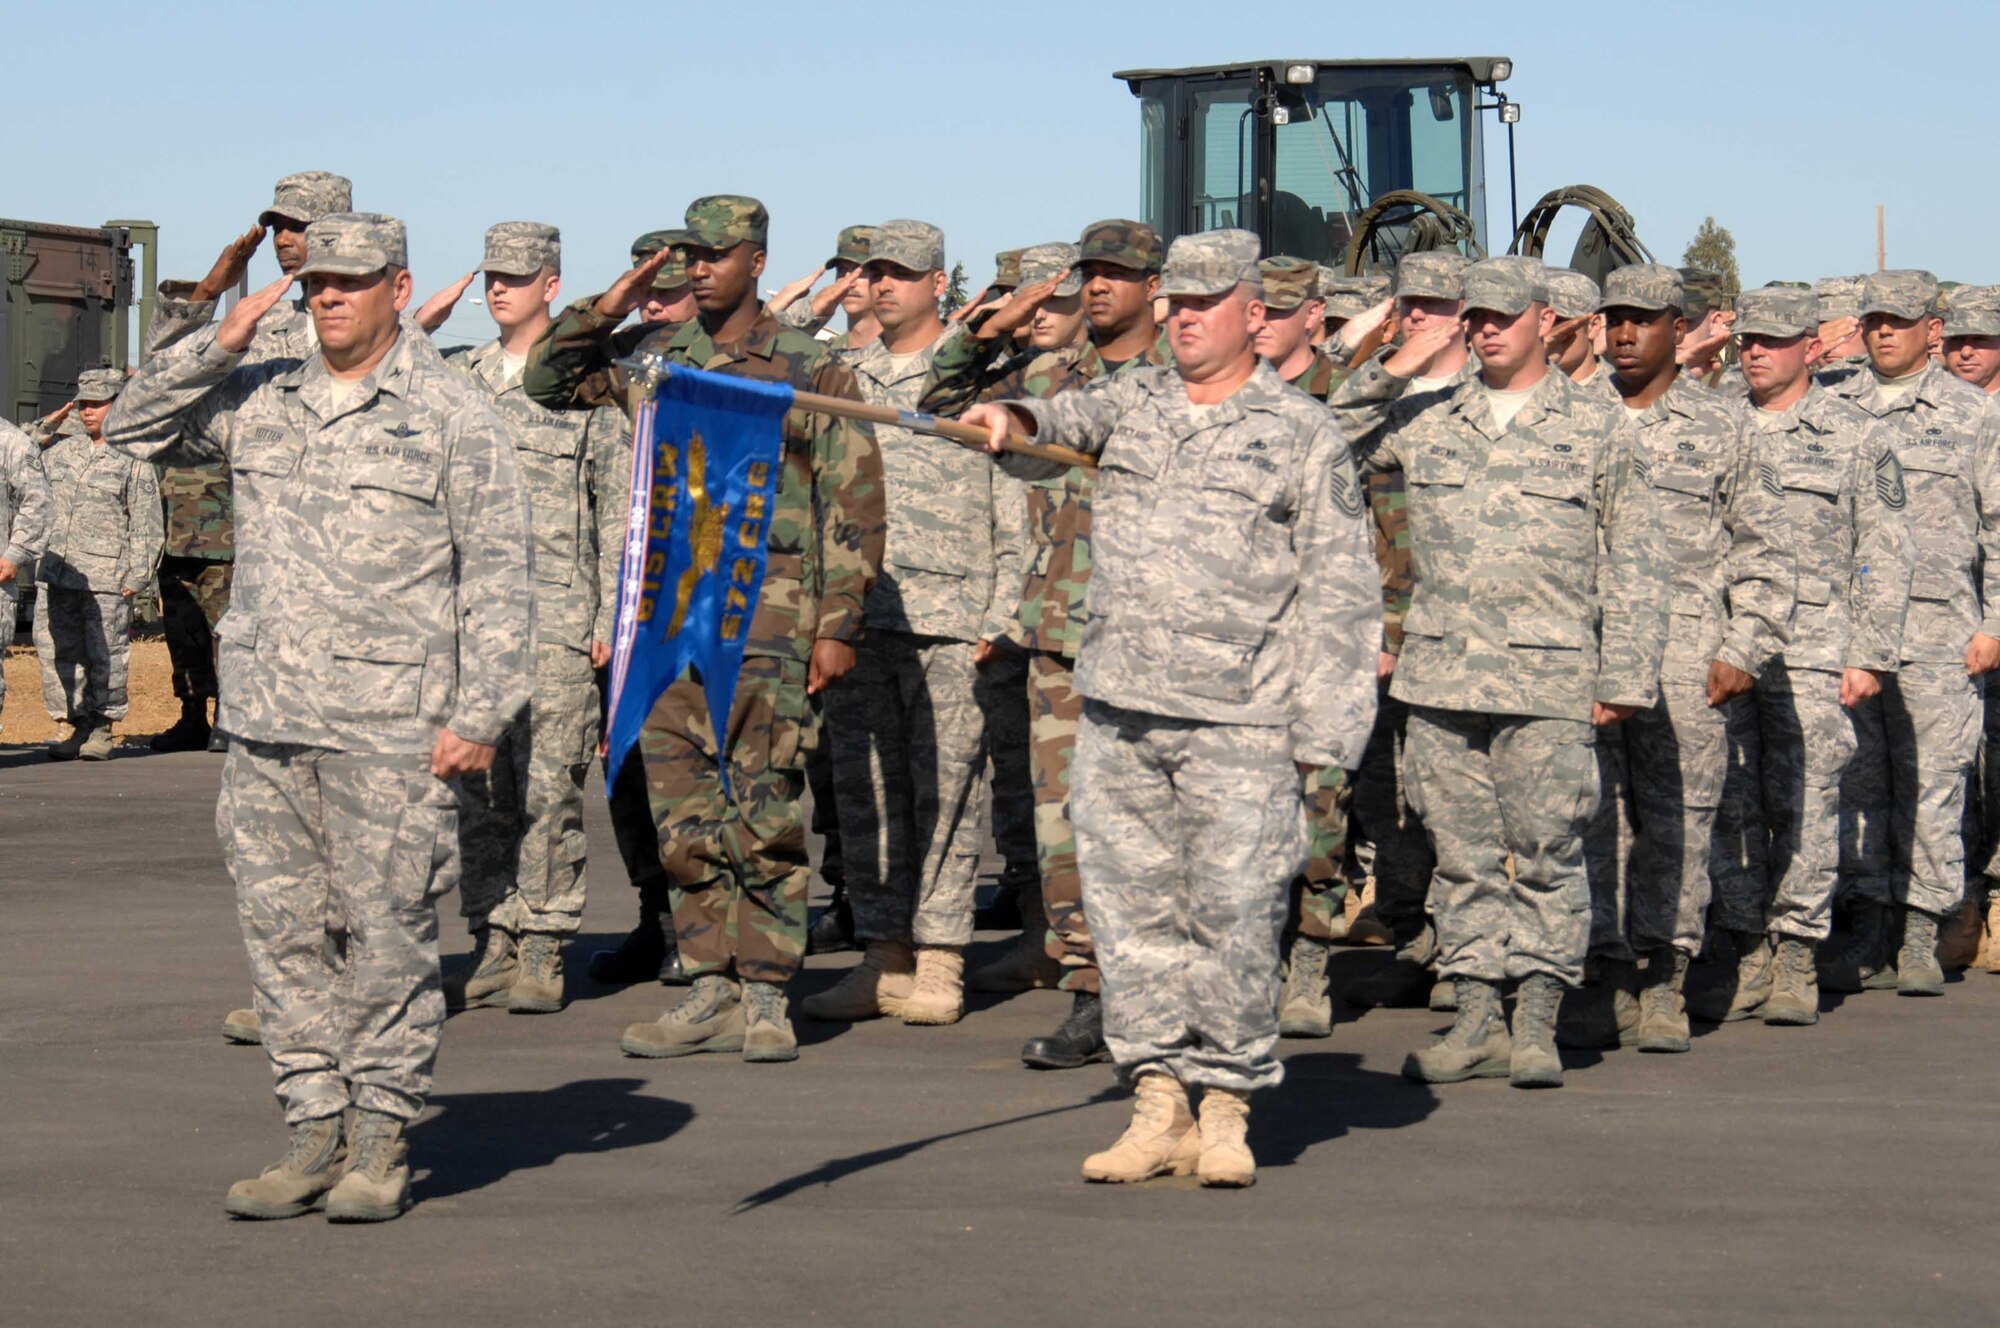 Col. Matthew Yotter, 572nd Contingency Response Group commander, leads his troops in salute during the 615th Contingency Response Wing change-of-command ceremony Sept. 23. Col. Tony Hinen relinquished command to Col. John Lipinski. (U.S. Air Force photo/Nan Wylie)